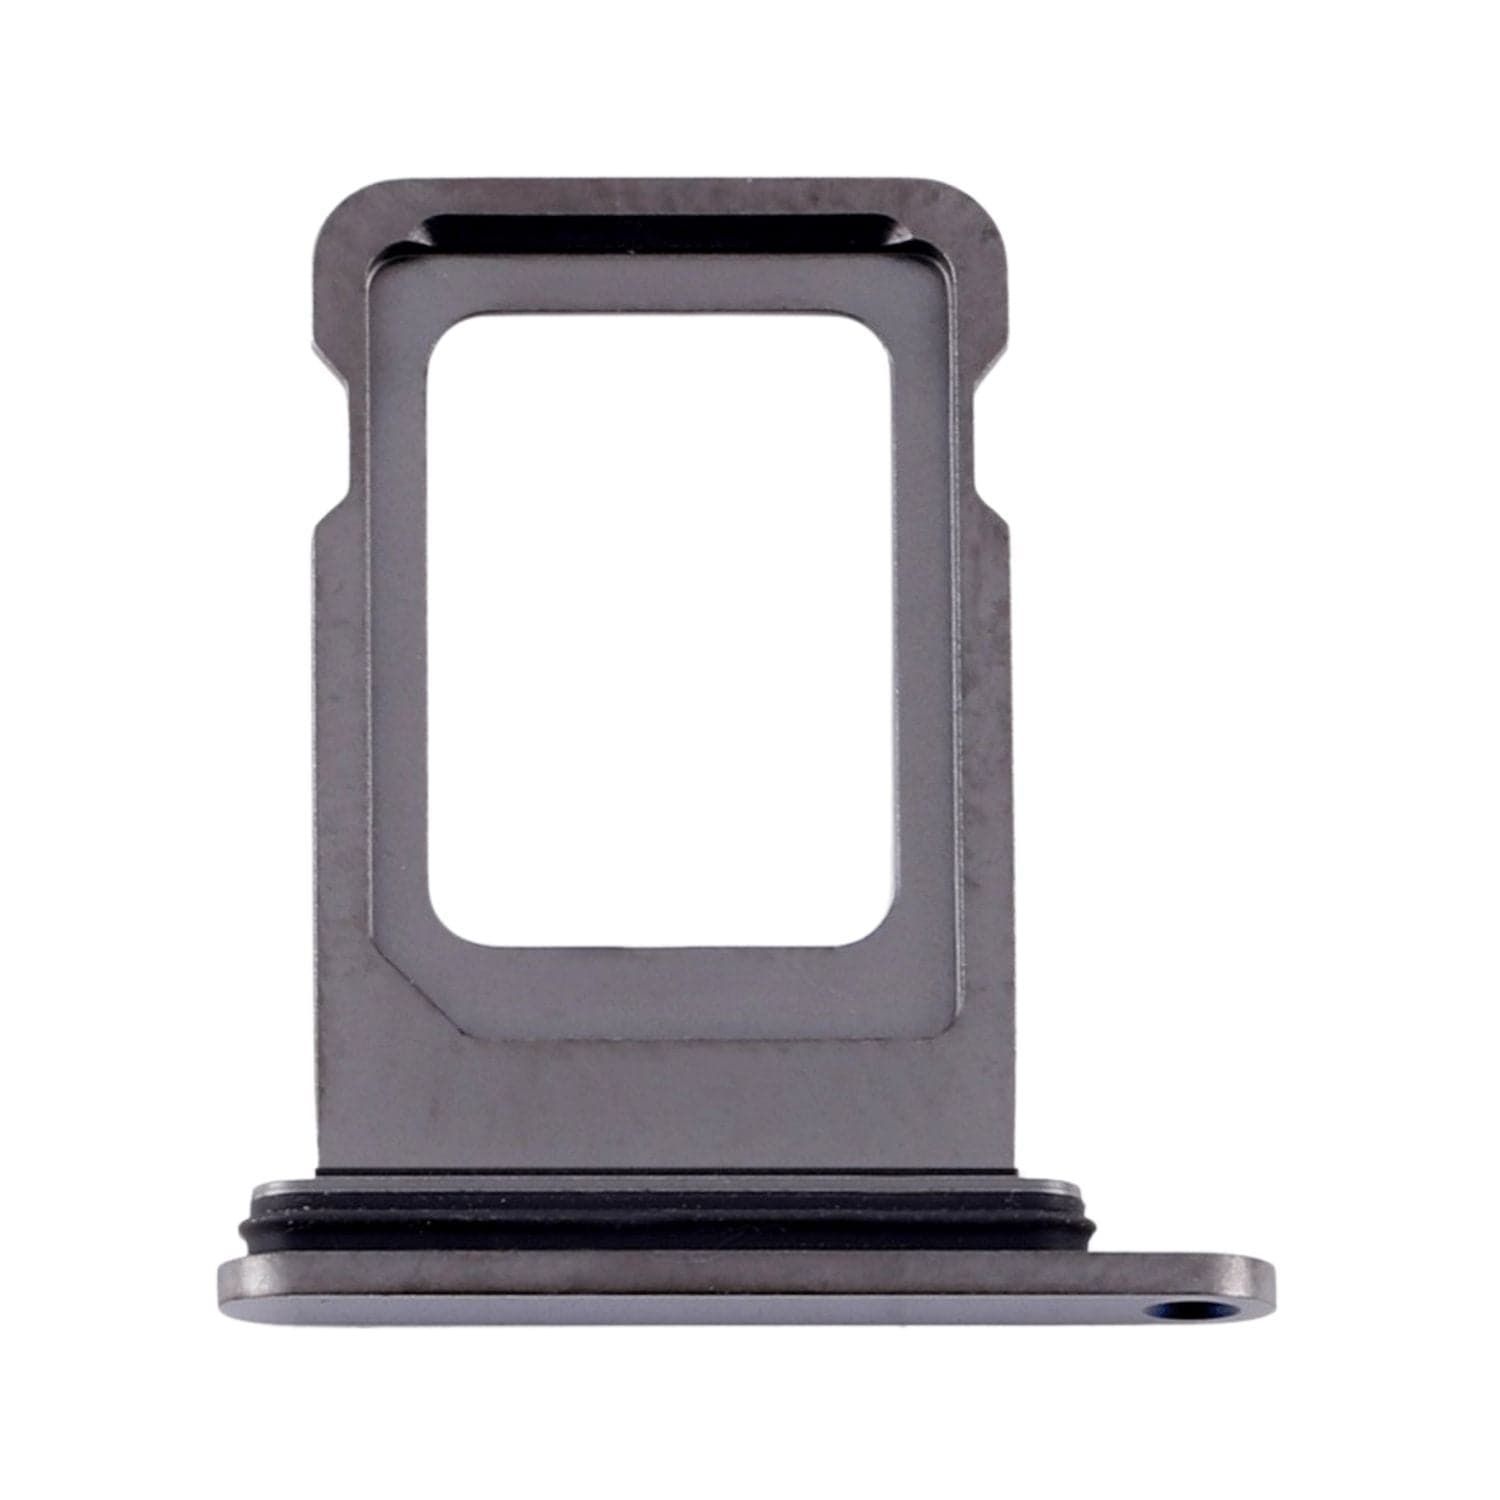 Sim Tray for iPhone 12 Pro / 12 Pro Max Black